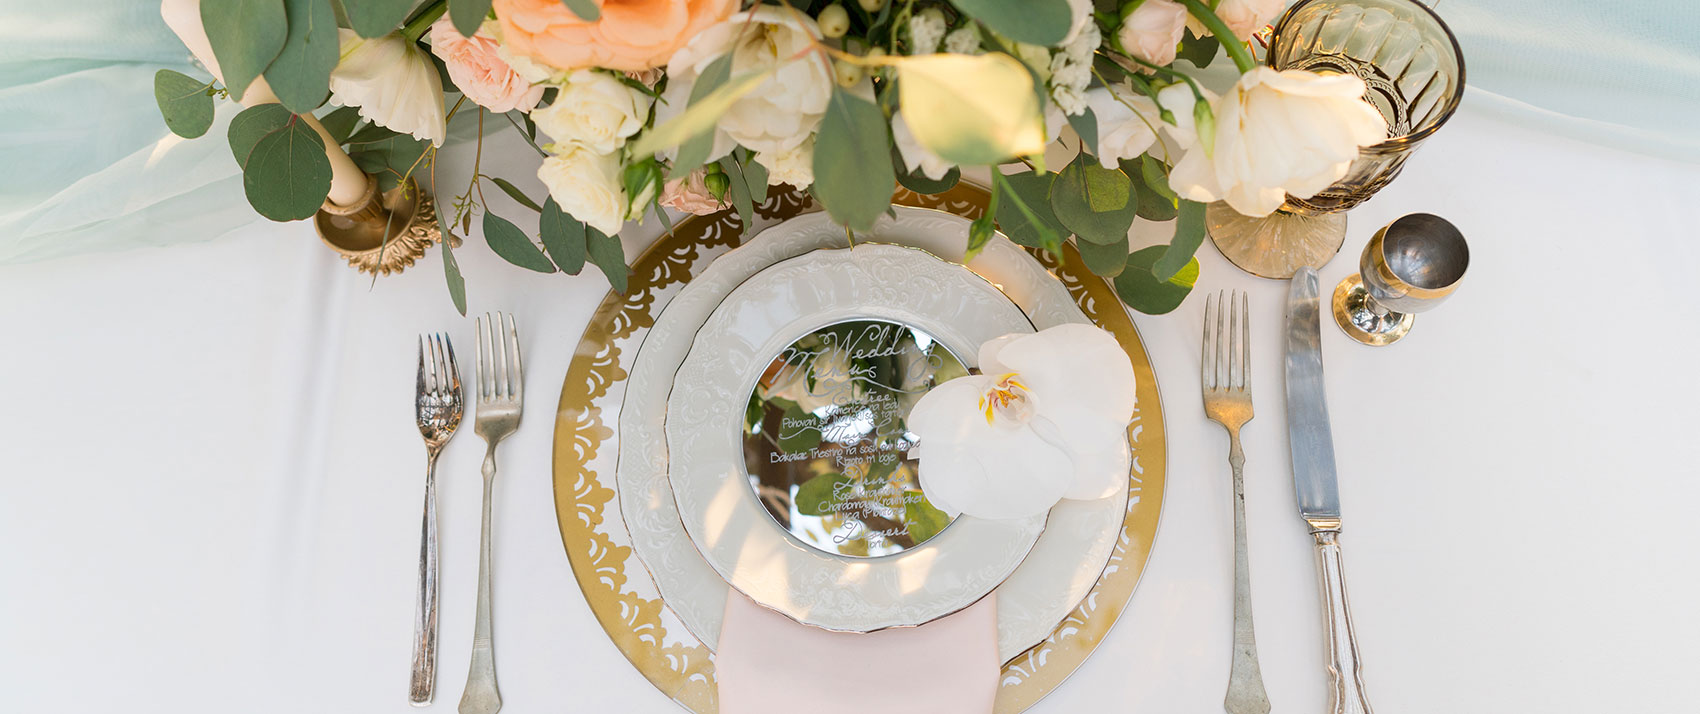 table set with wedding flowers and champagne glasses